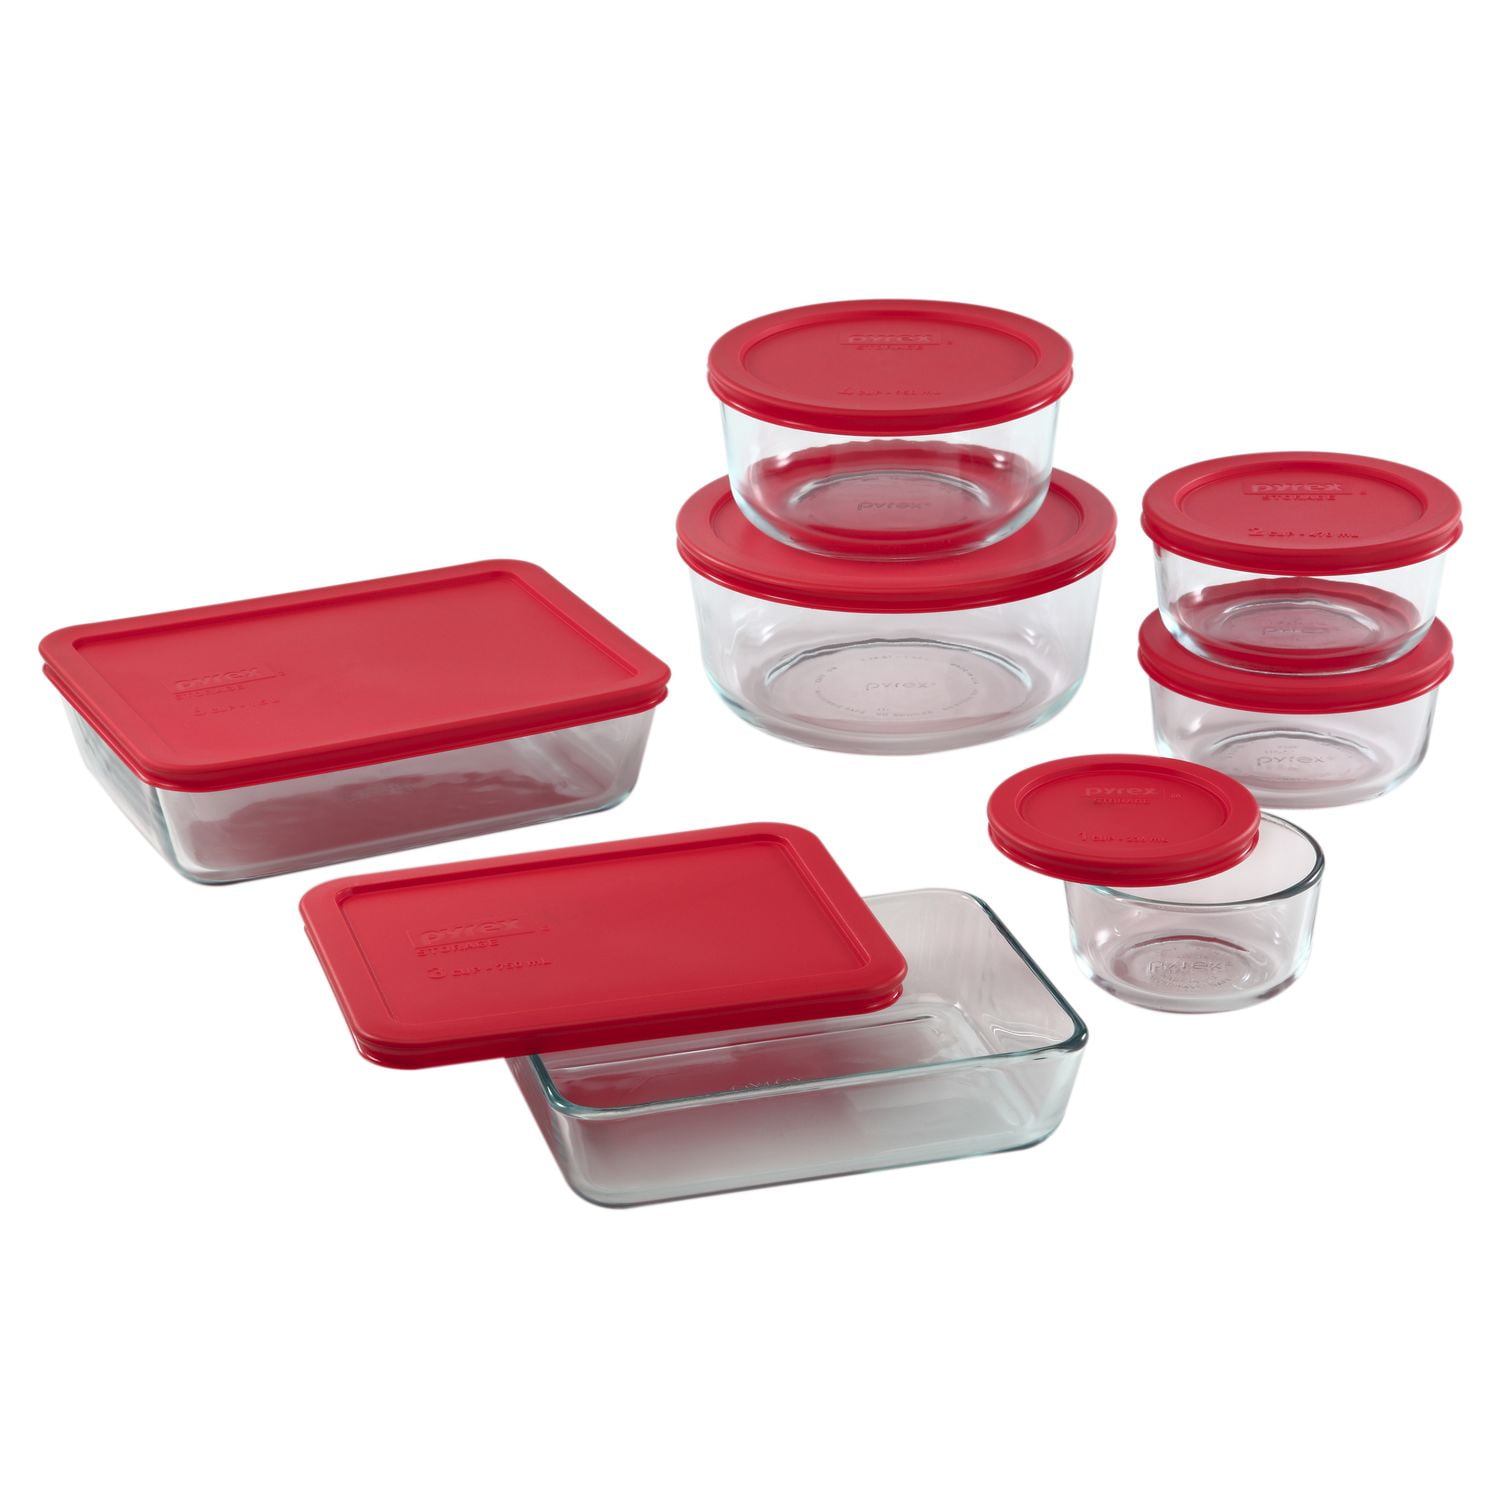 14PC PLASTIC FOOD CONTAINER SET TOPPERWARE WITH LIDS FOOD STORAGE LUNCH BOX 